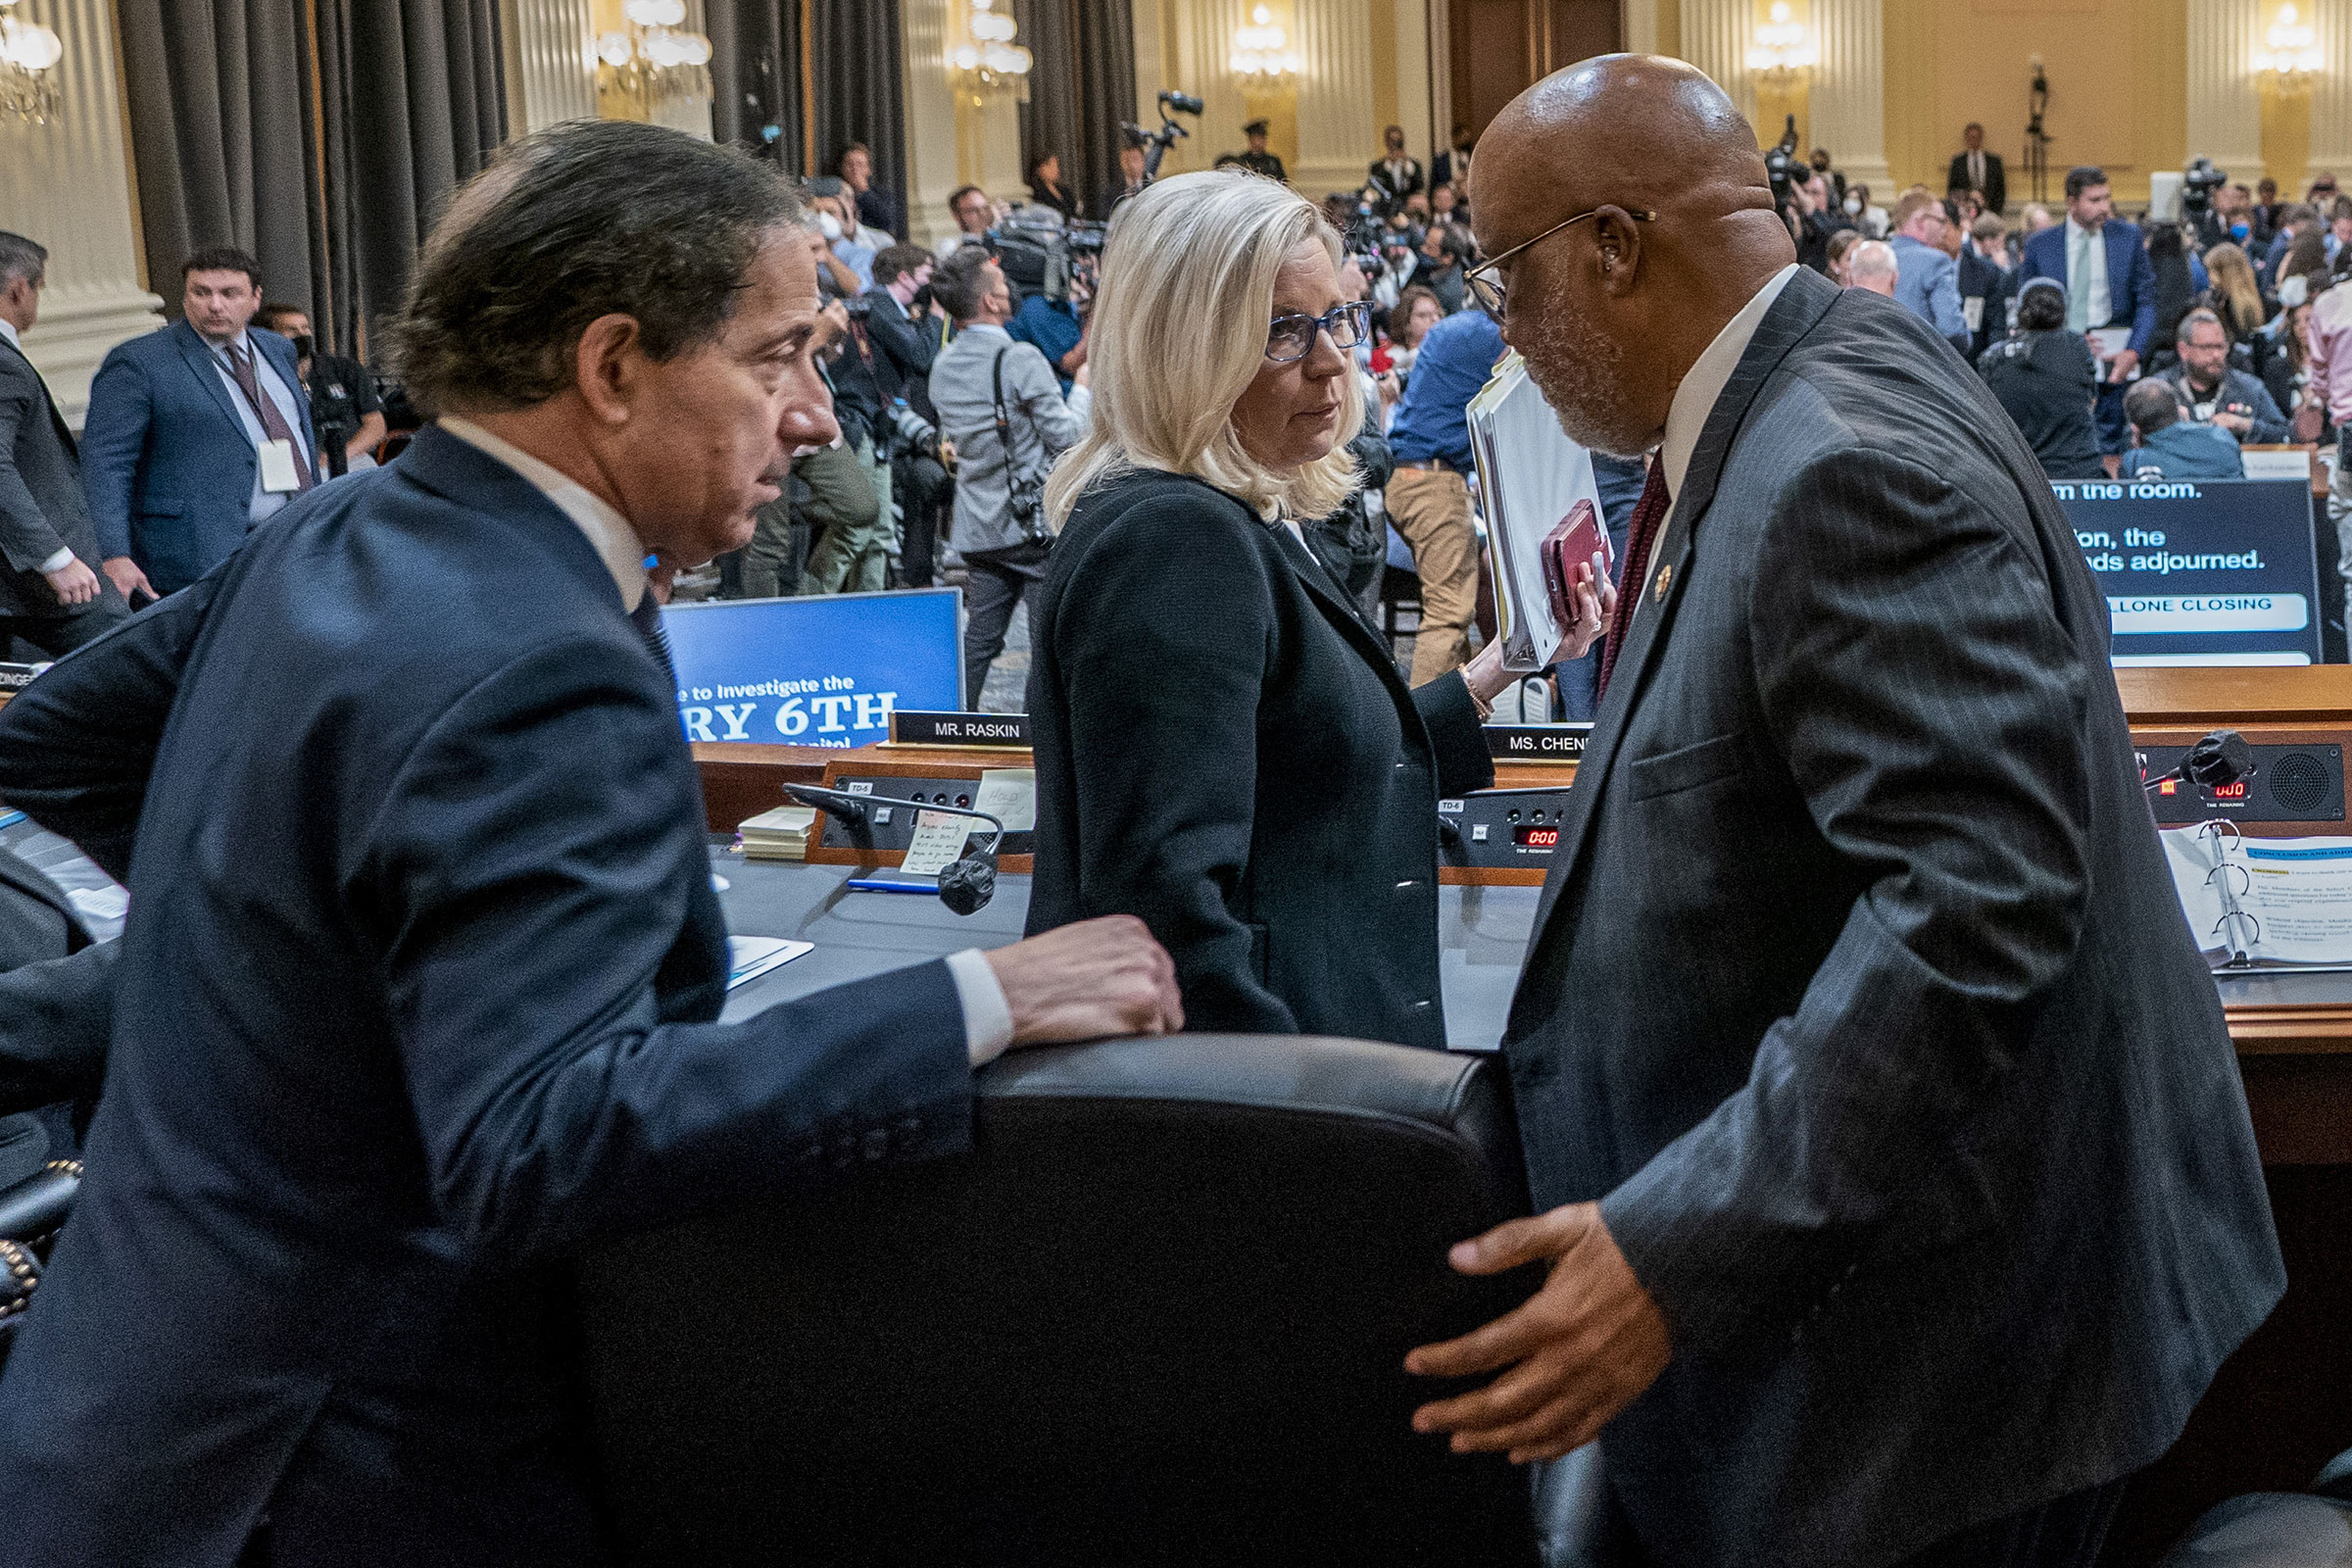 Rep. Bennie Thompson, left, Rep. Liz Cheney, center, and Rep Jamie Raskin exit following a hearing on July 12, 2022. (Shawn Thew—EPA/Bloomberg/Getty Images)